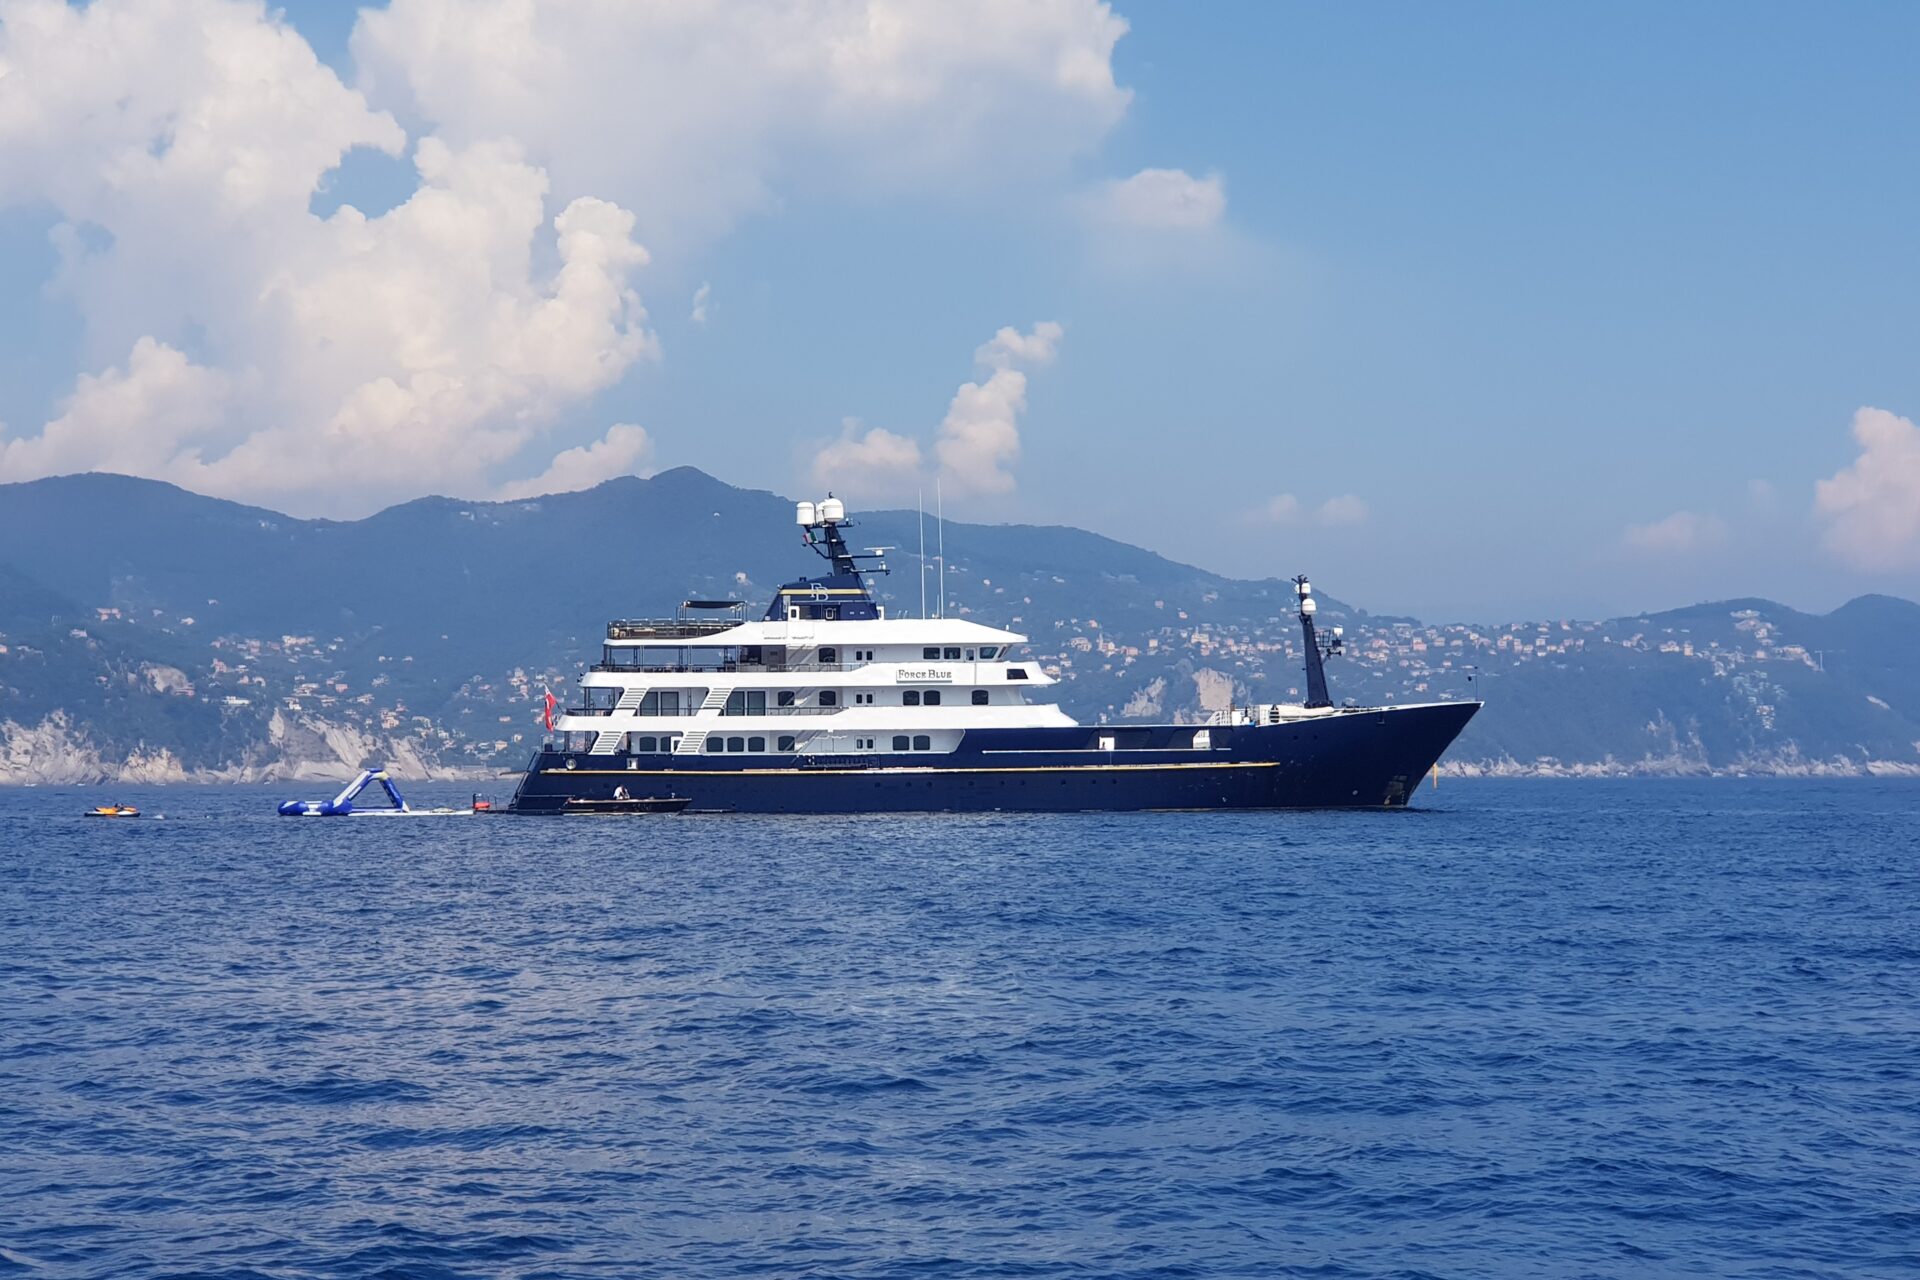 yacht briatore force blue